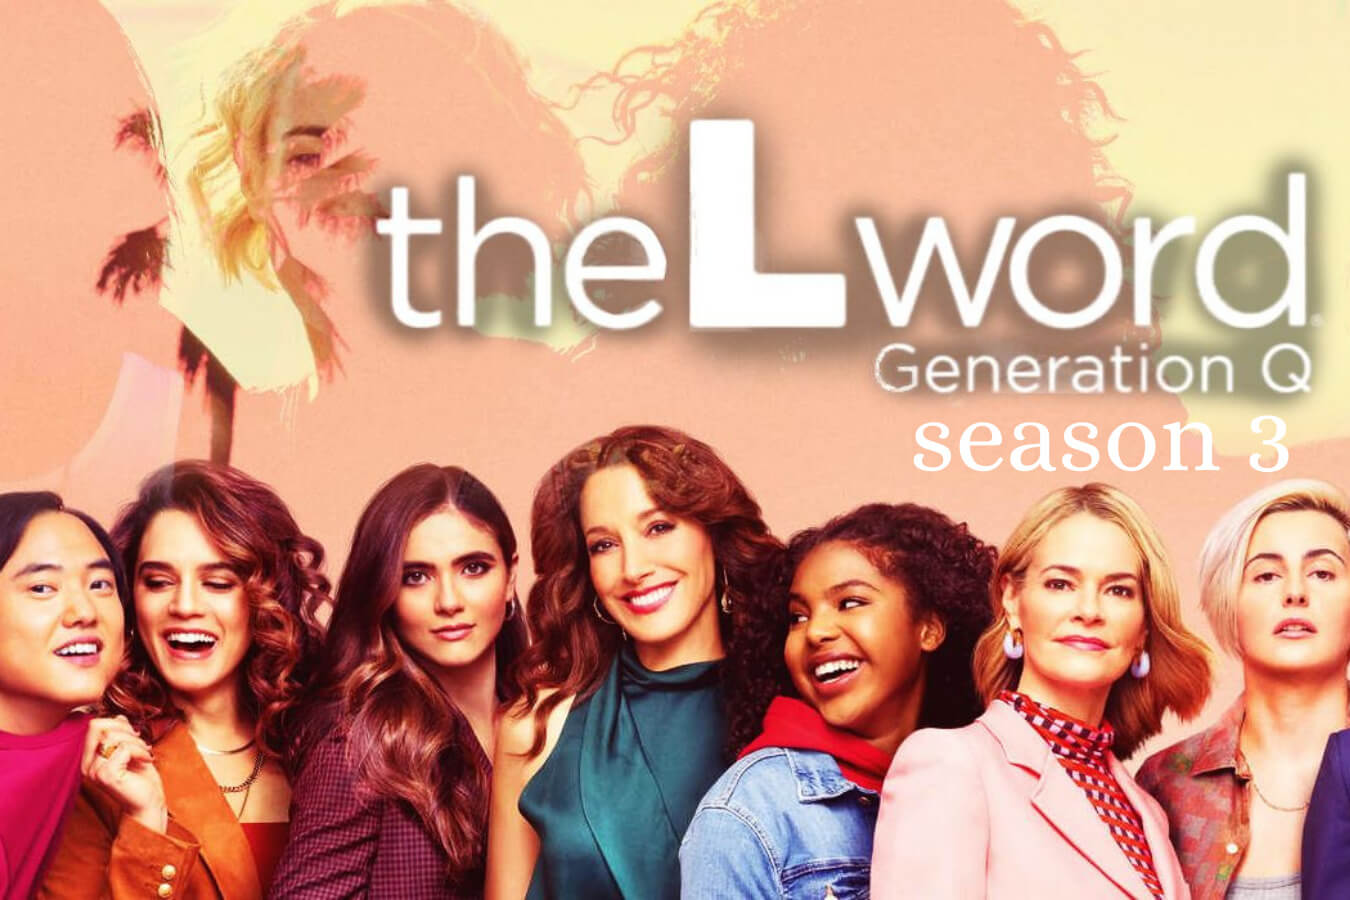 Is The L Word Generation Q available for free to watch